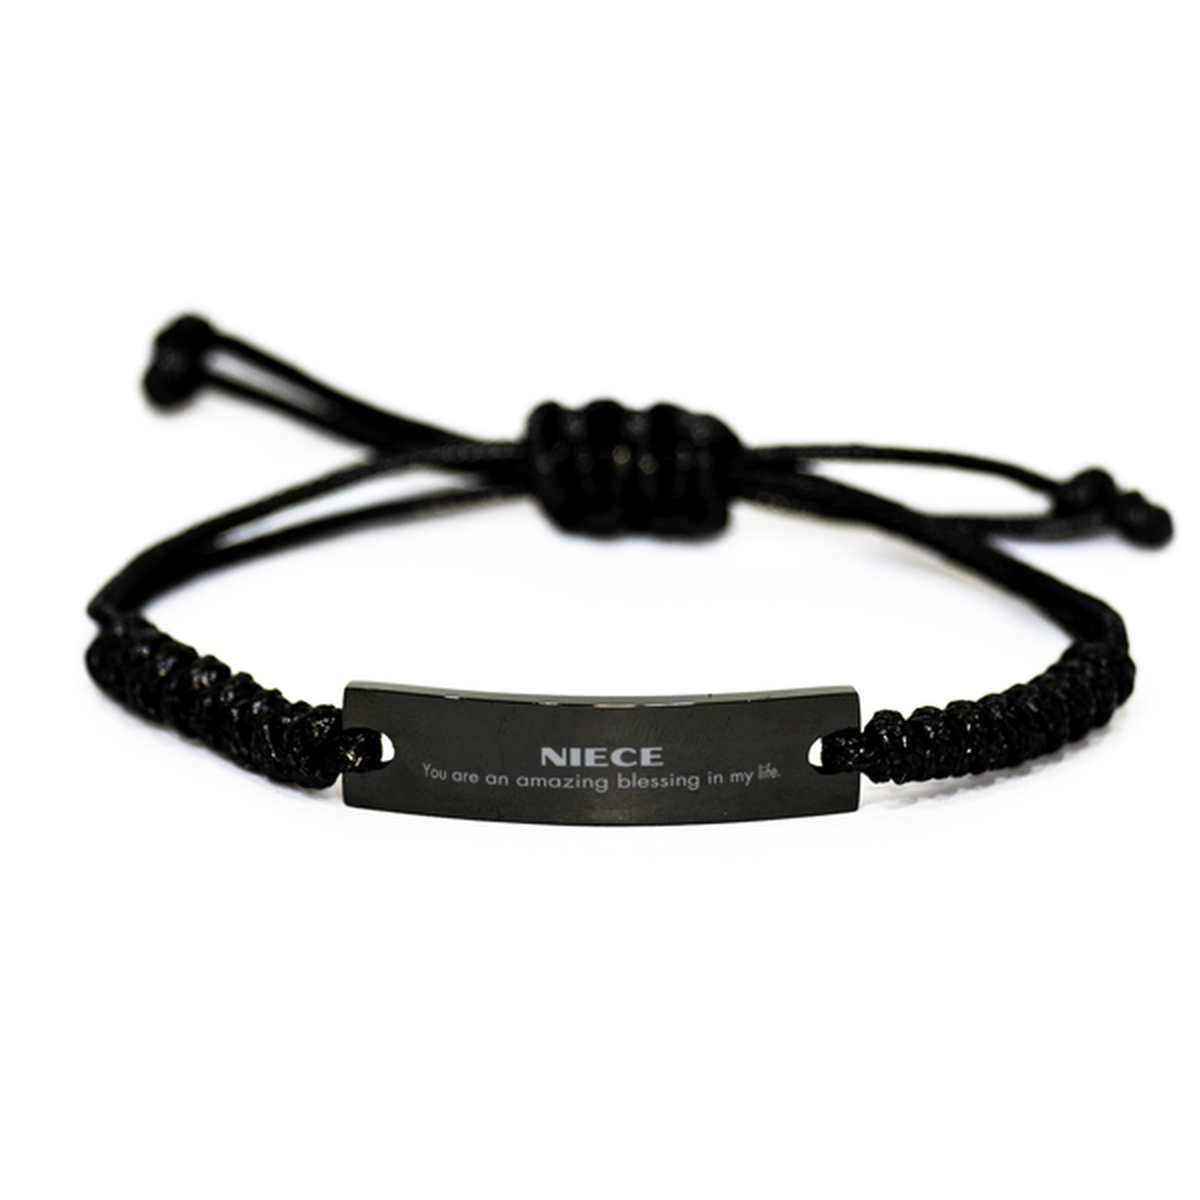 Niece Black Rope Bracelet, You are an amazing blessing in my life, Thank You Gifts For Niece, Inspirational Birthday Christmas Unique Gifts For Niece